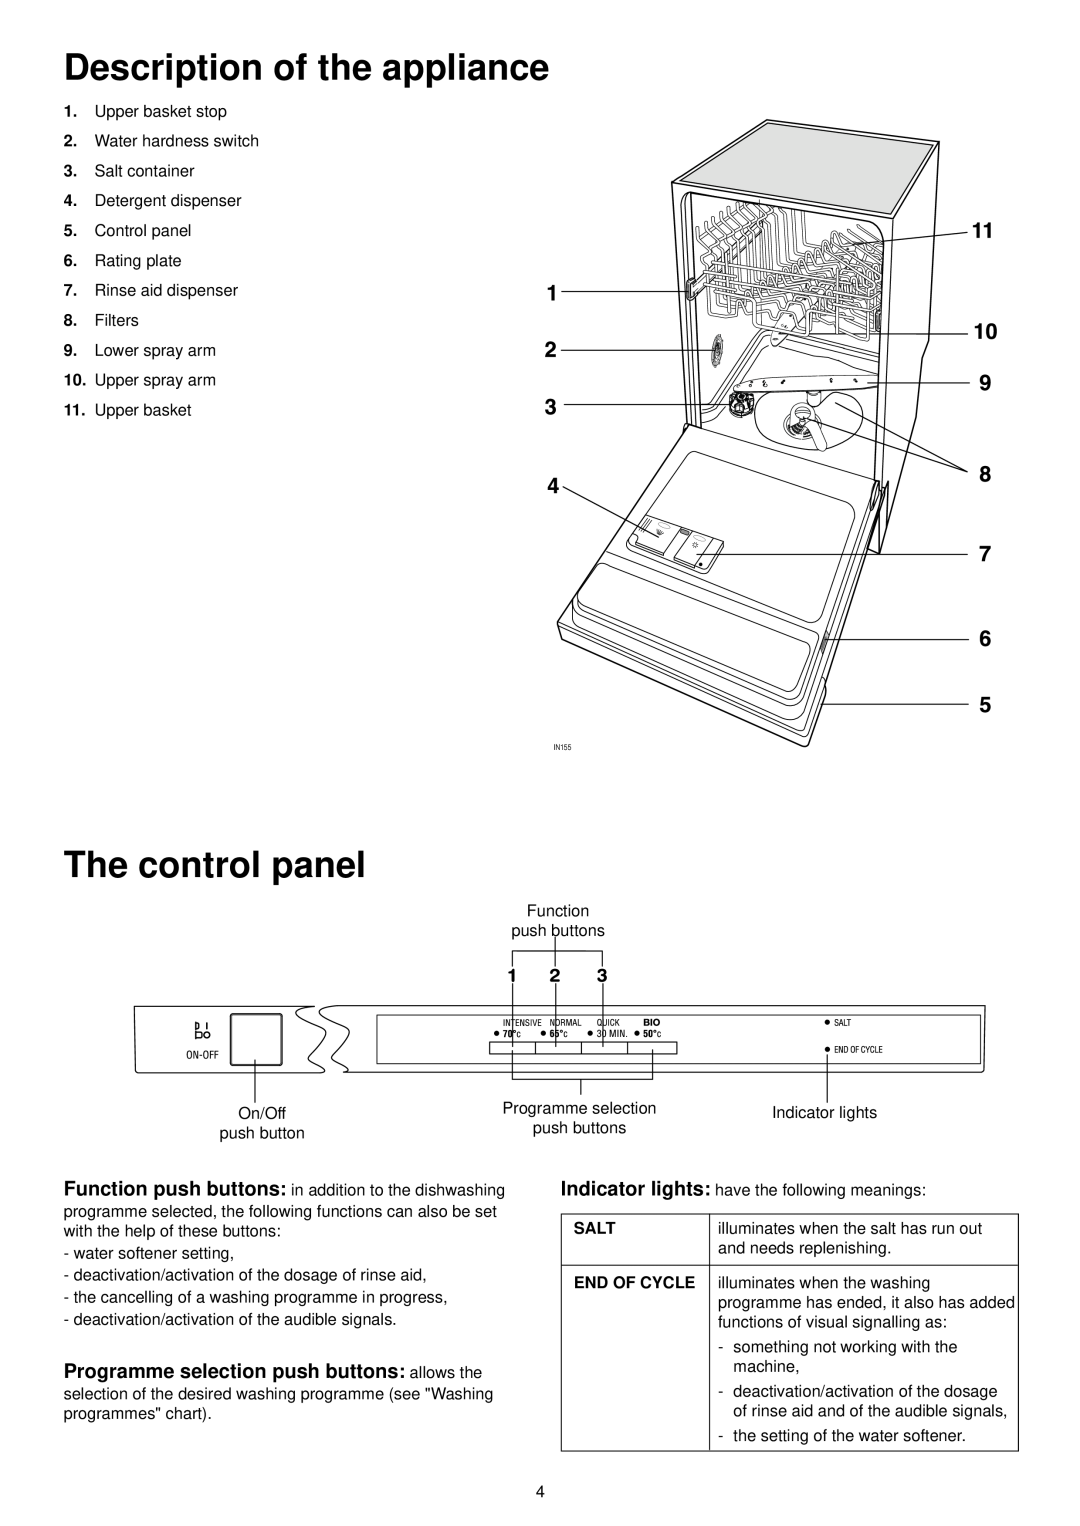 Zanussi ZDT 5044 Description of the appliance, The control panel, Filters, Lower spray arm, Upper spray arm, Upper basket 